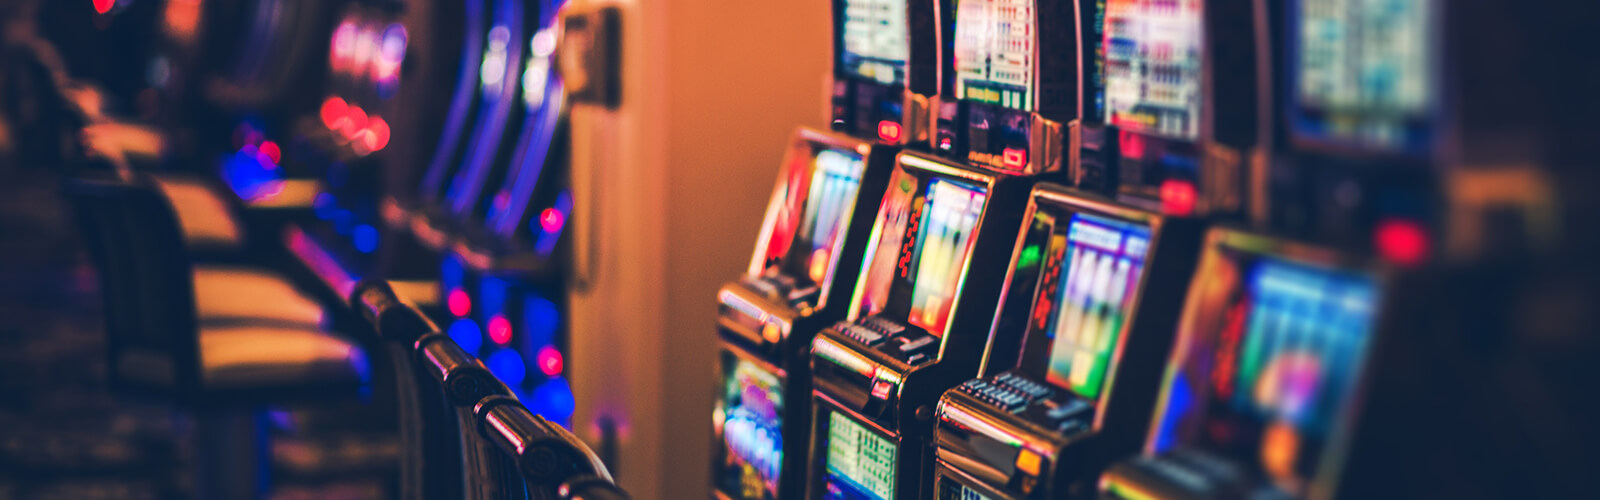 image of a row of slot machines